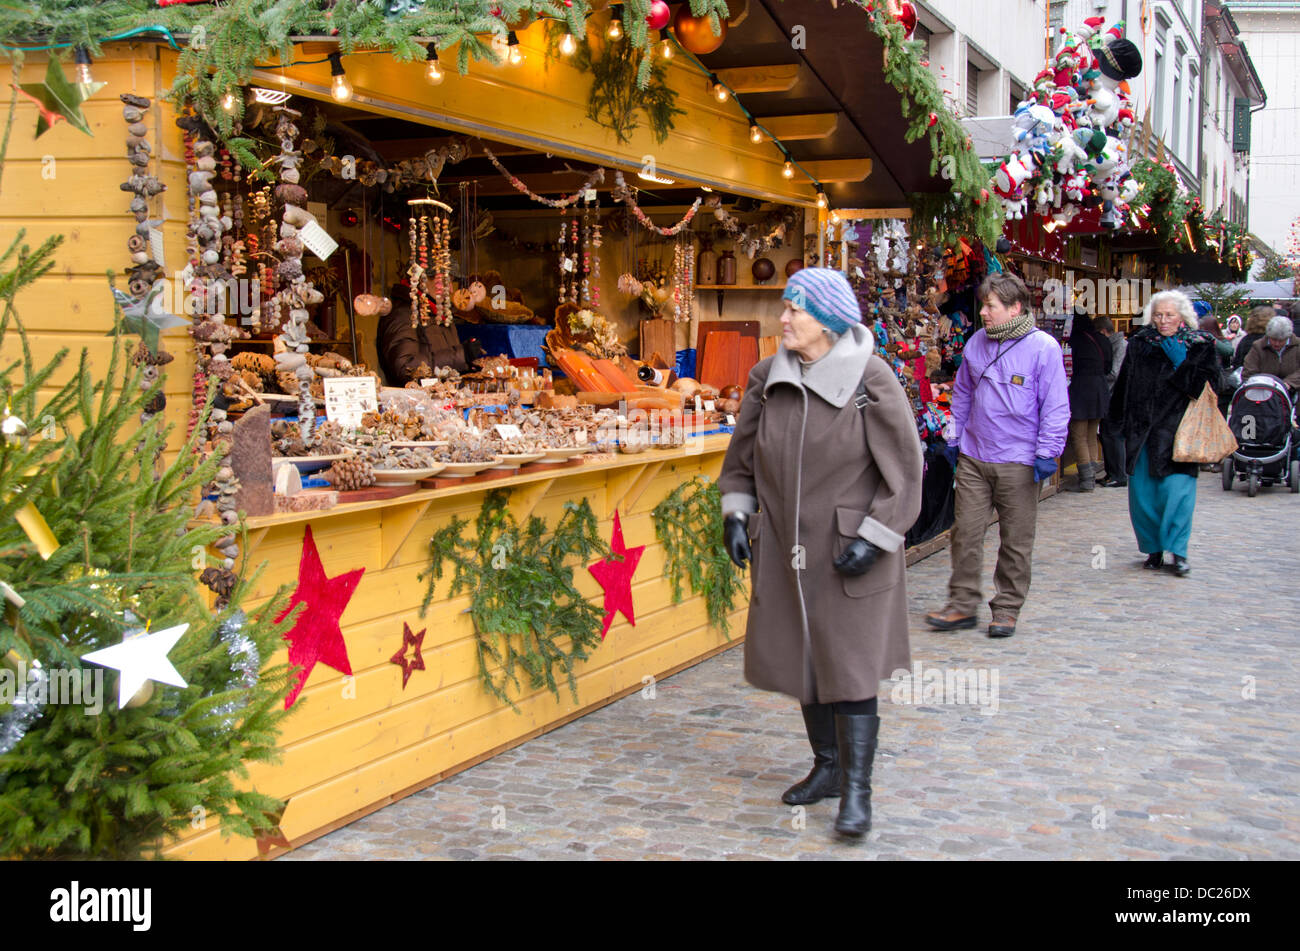 Switzerland, Basel. Basel Winter Holiday Market at Barfusserplatz. Typical  vendor stand at winter market with people shopping Stock Photo - Alamy